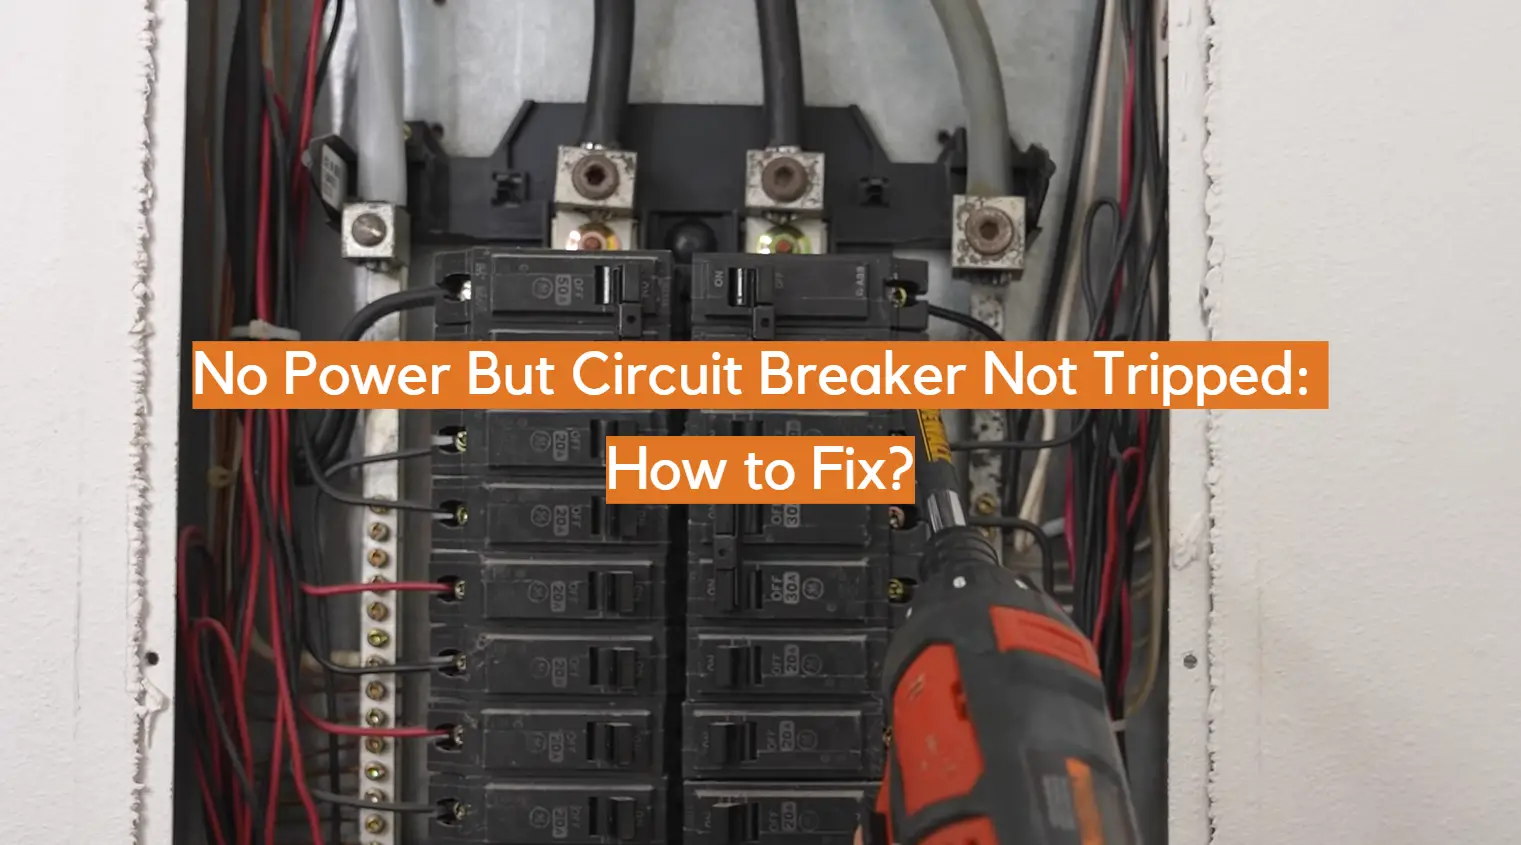 No Power But Circuit Breaker Not Tripped: How to Fix?